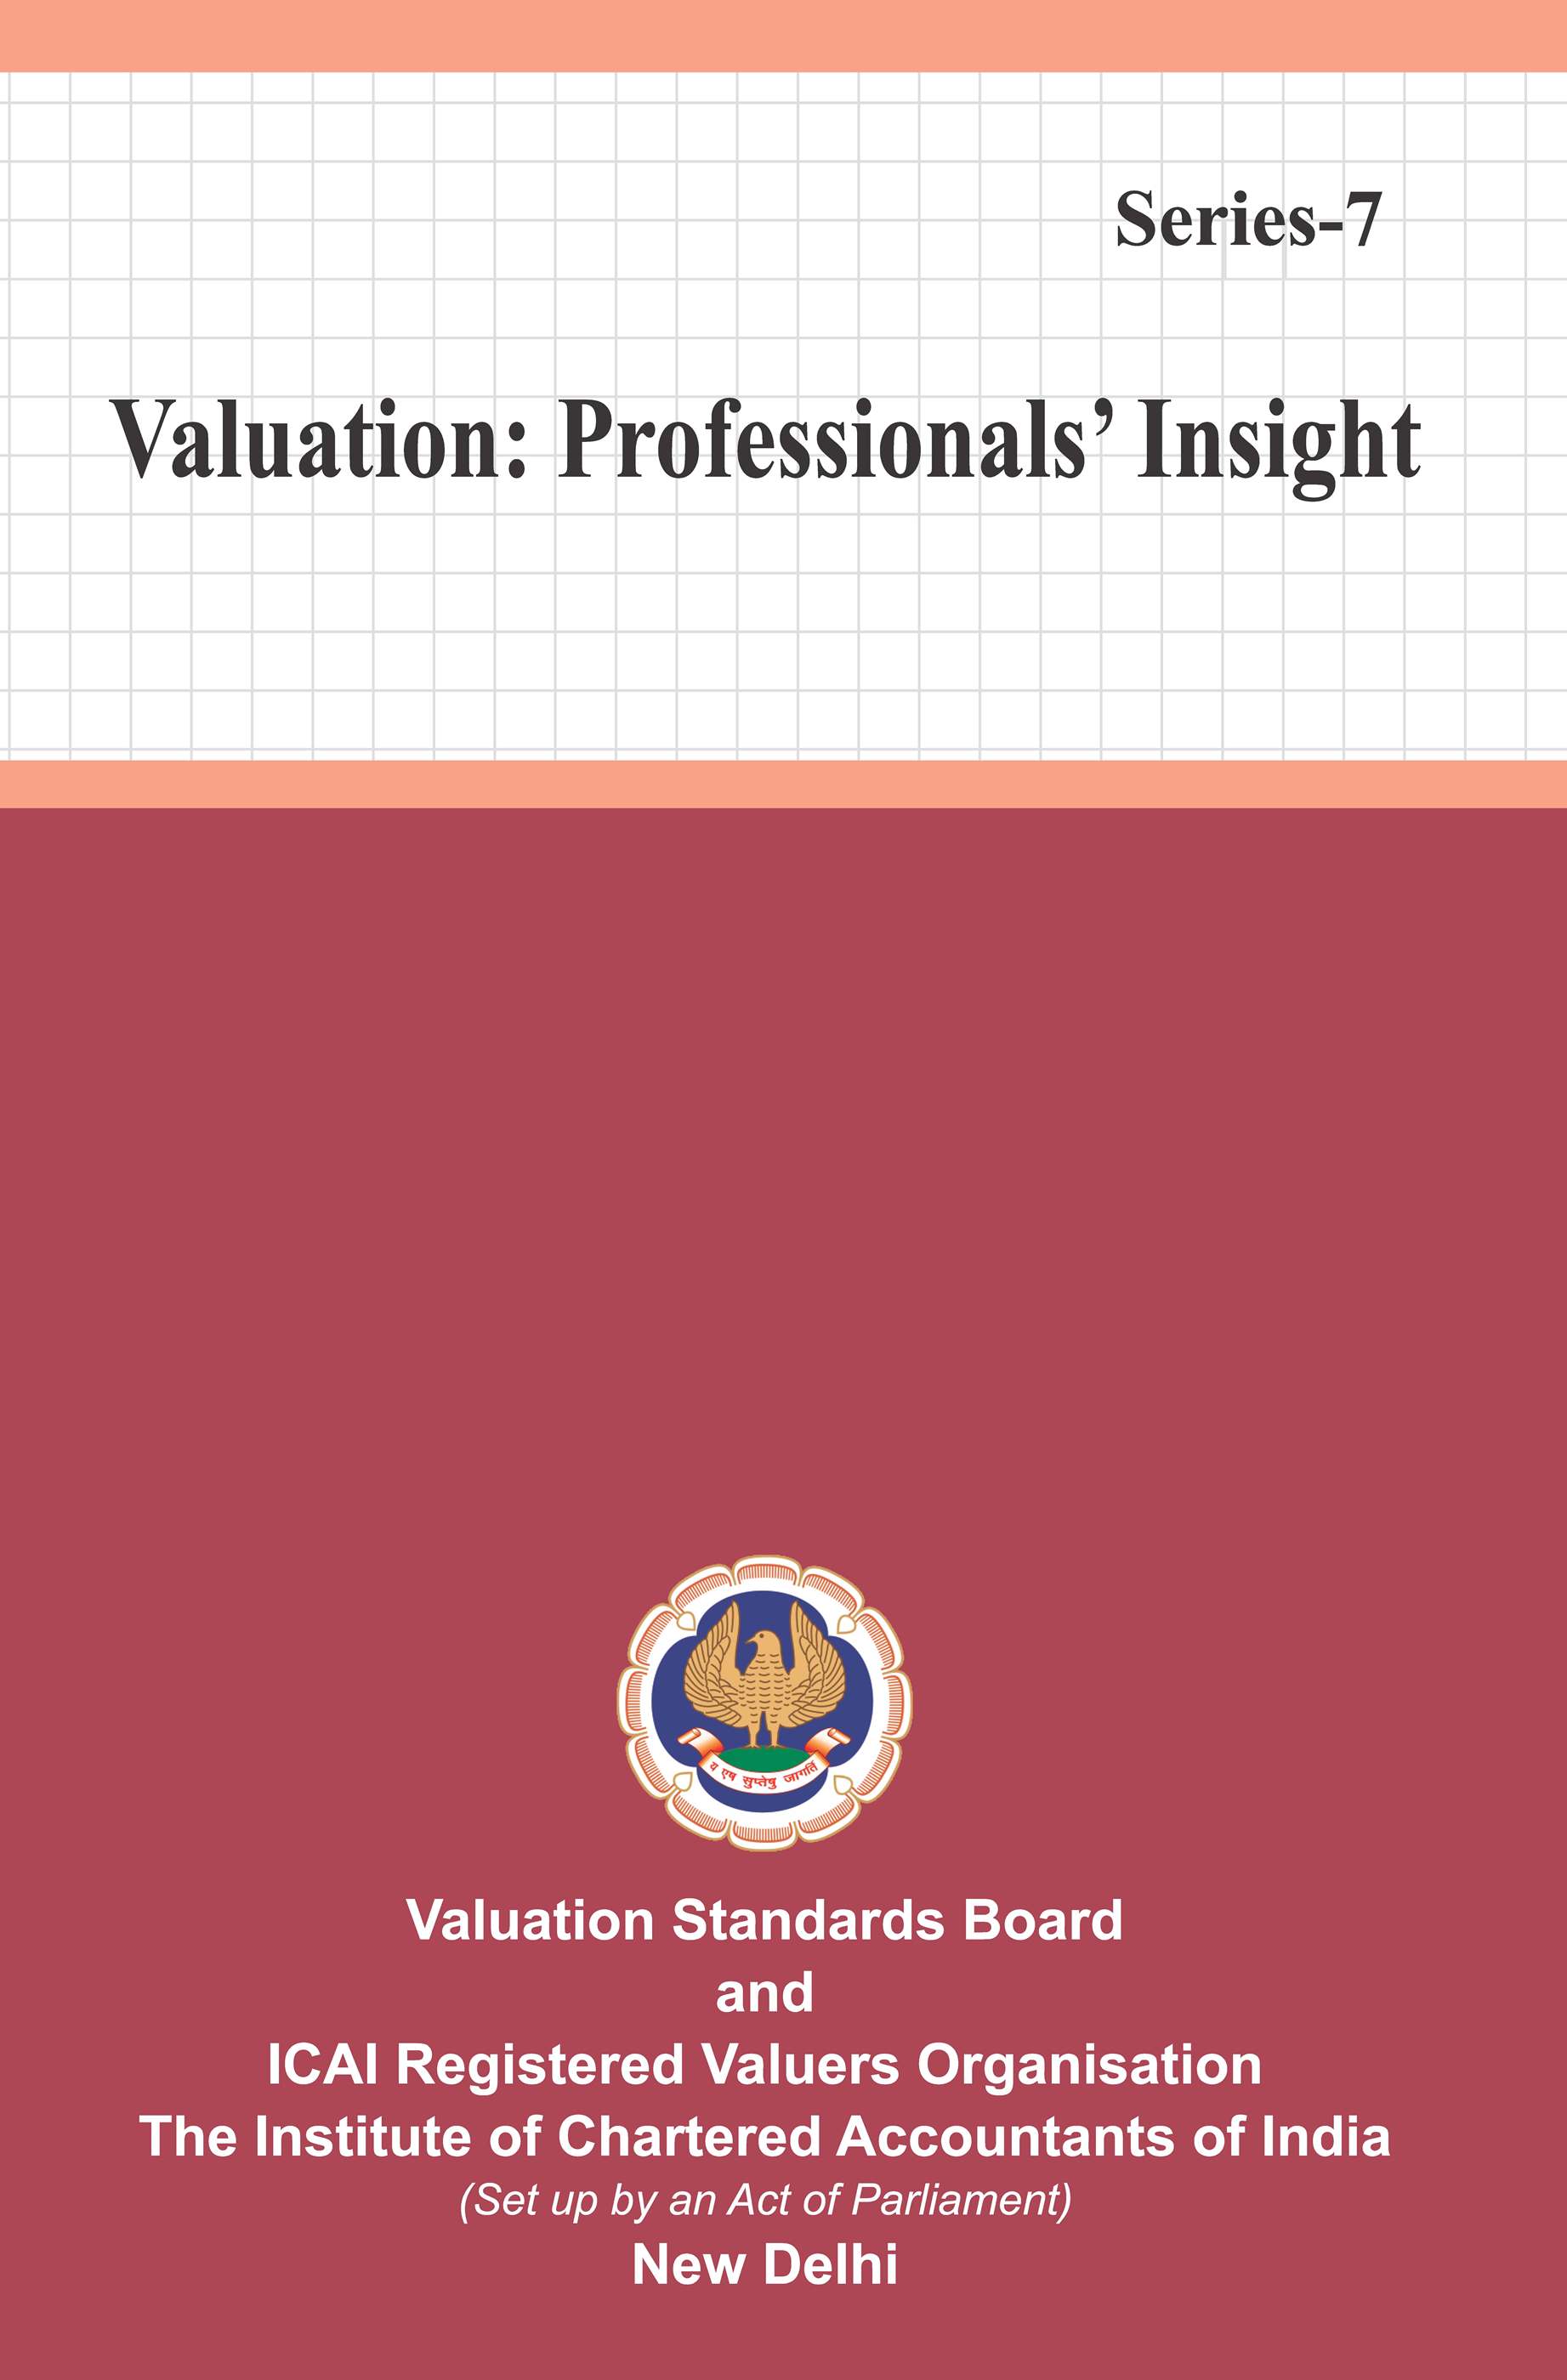 Valuation: Professionals' Insight - Series 7 (July, 2022)